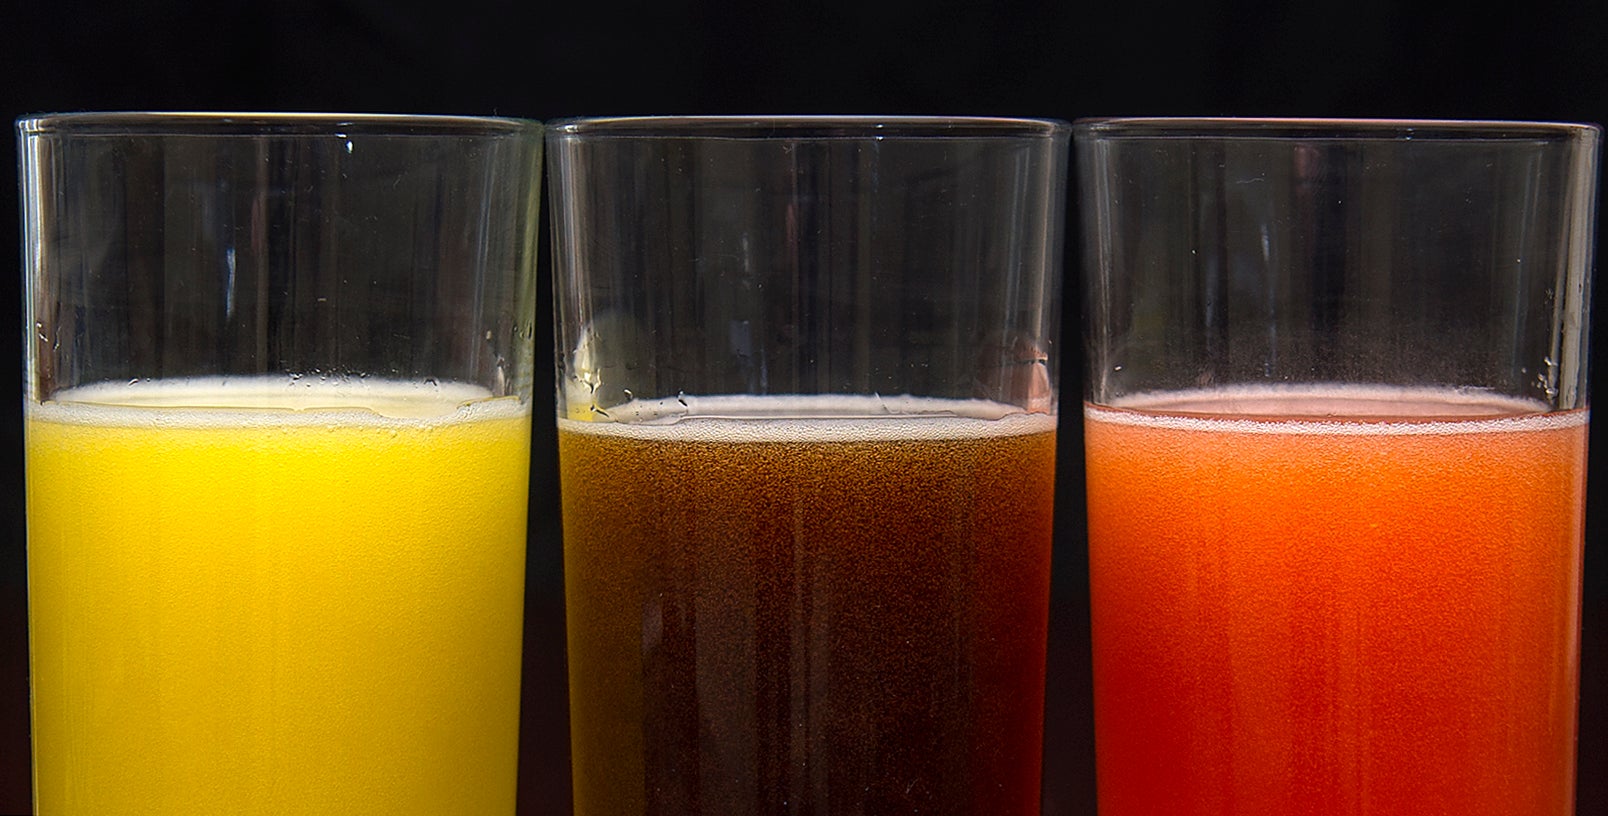 Orange, cola and fruit mix carbonated drinks were studied